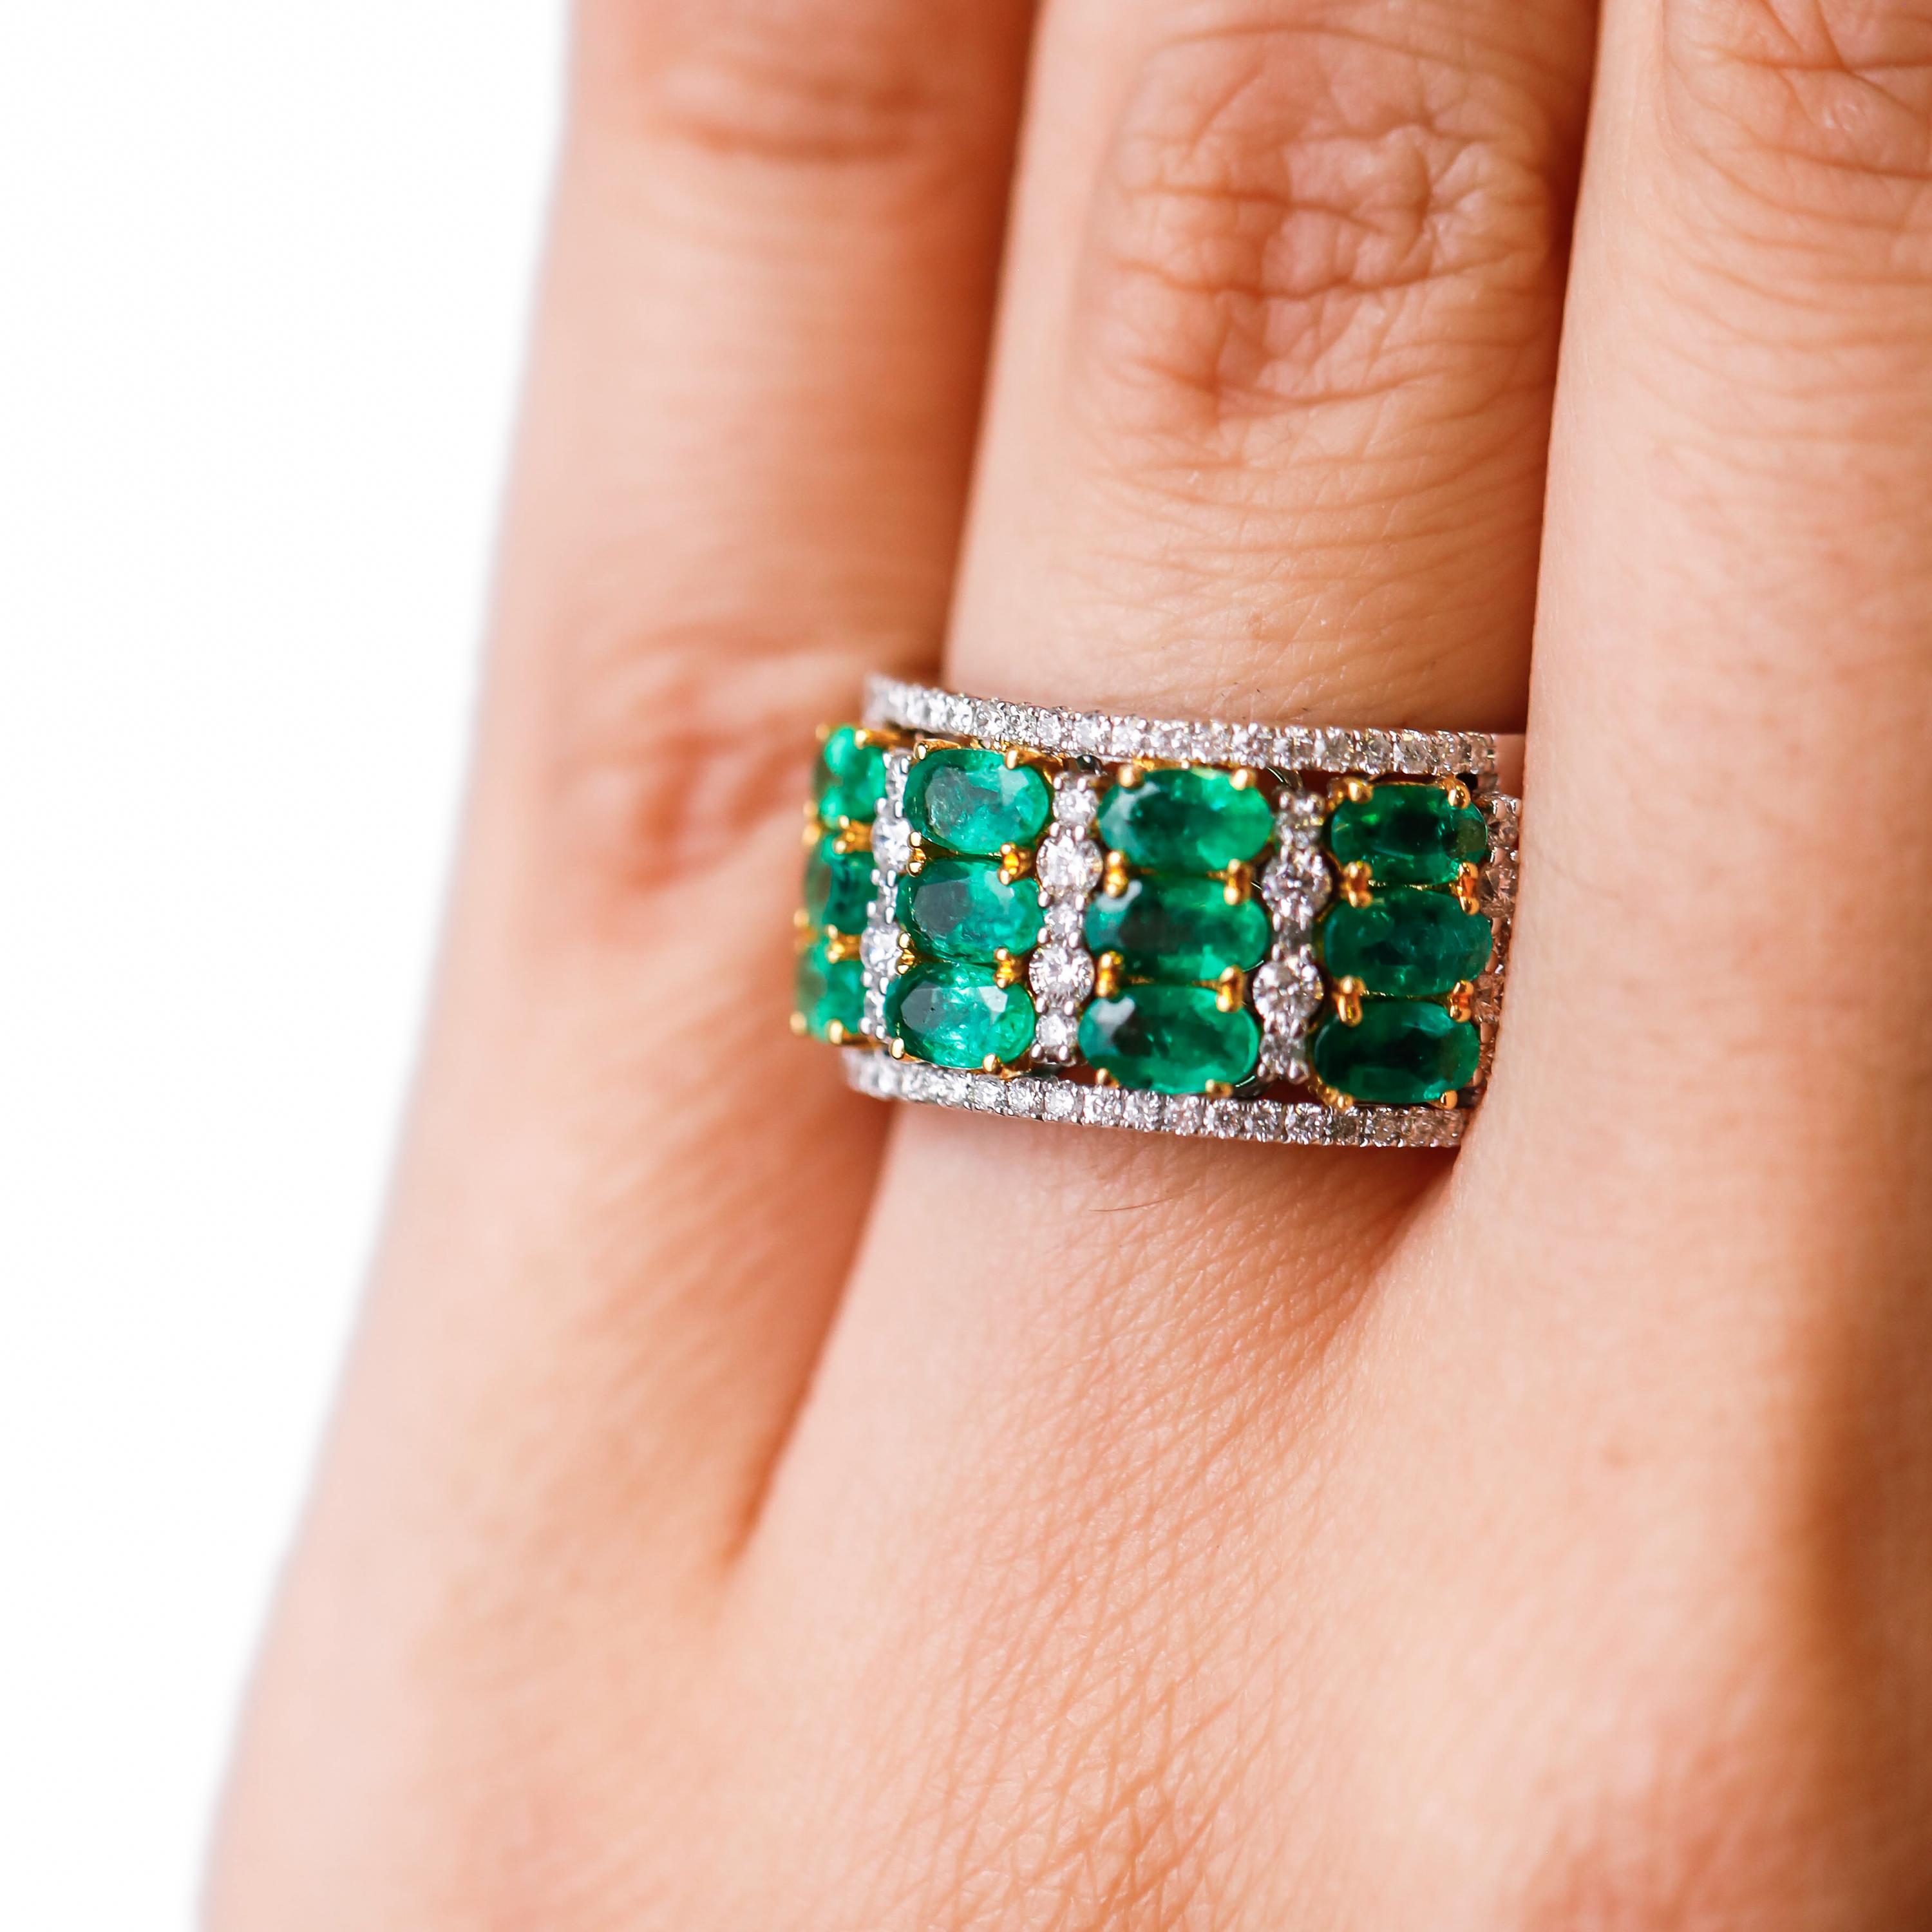 Women's 2.69 Carat Oval Cut Emerald and Round Diamond Cocktail Ring in 18k Two-Tone Gold